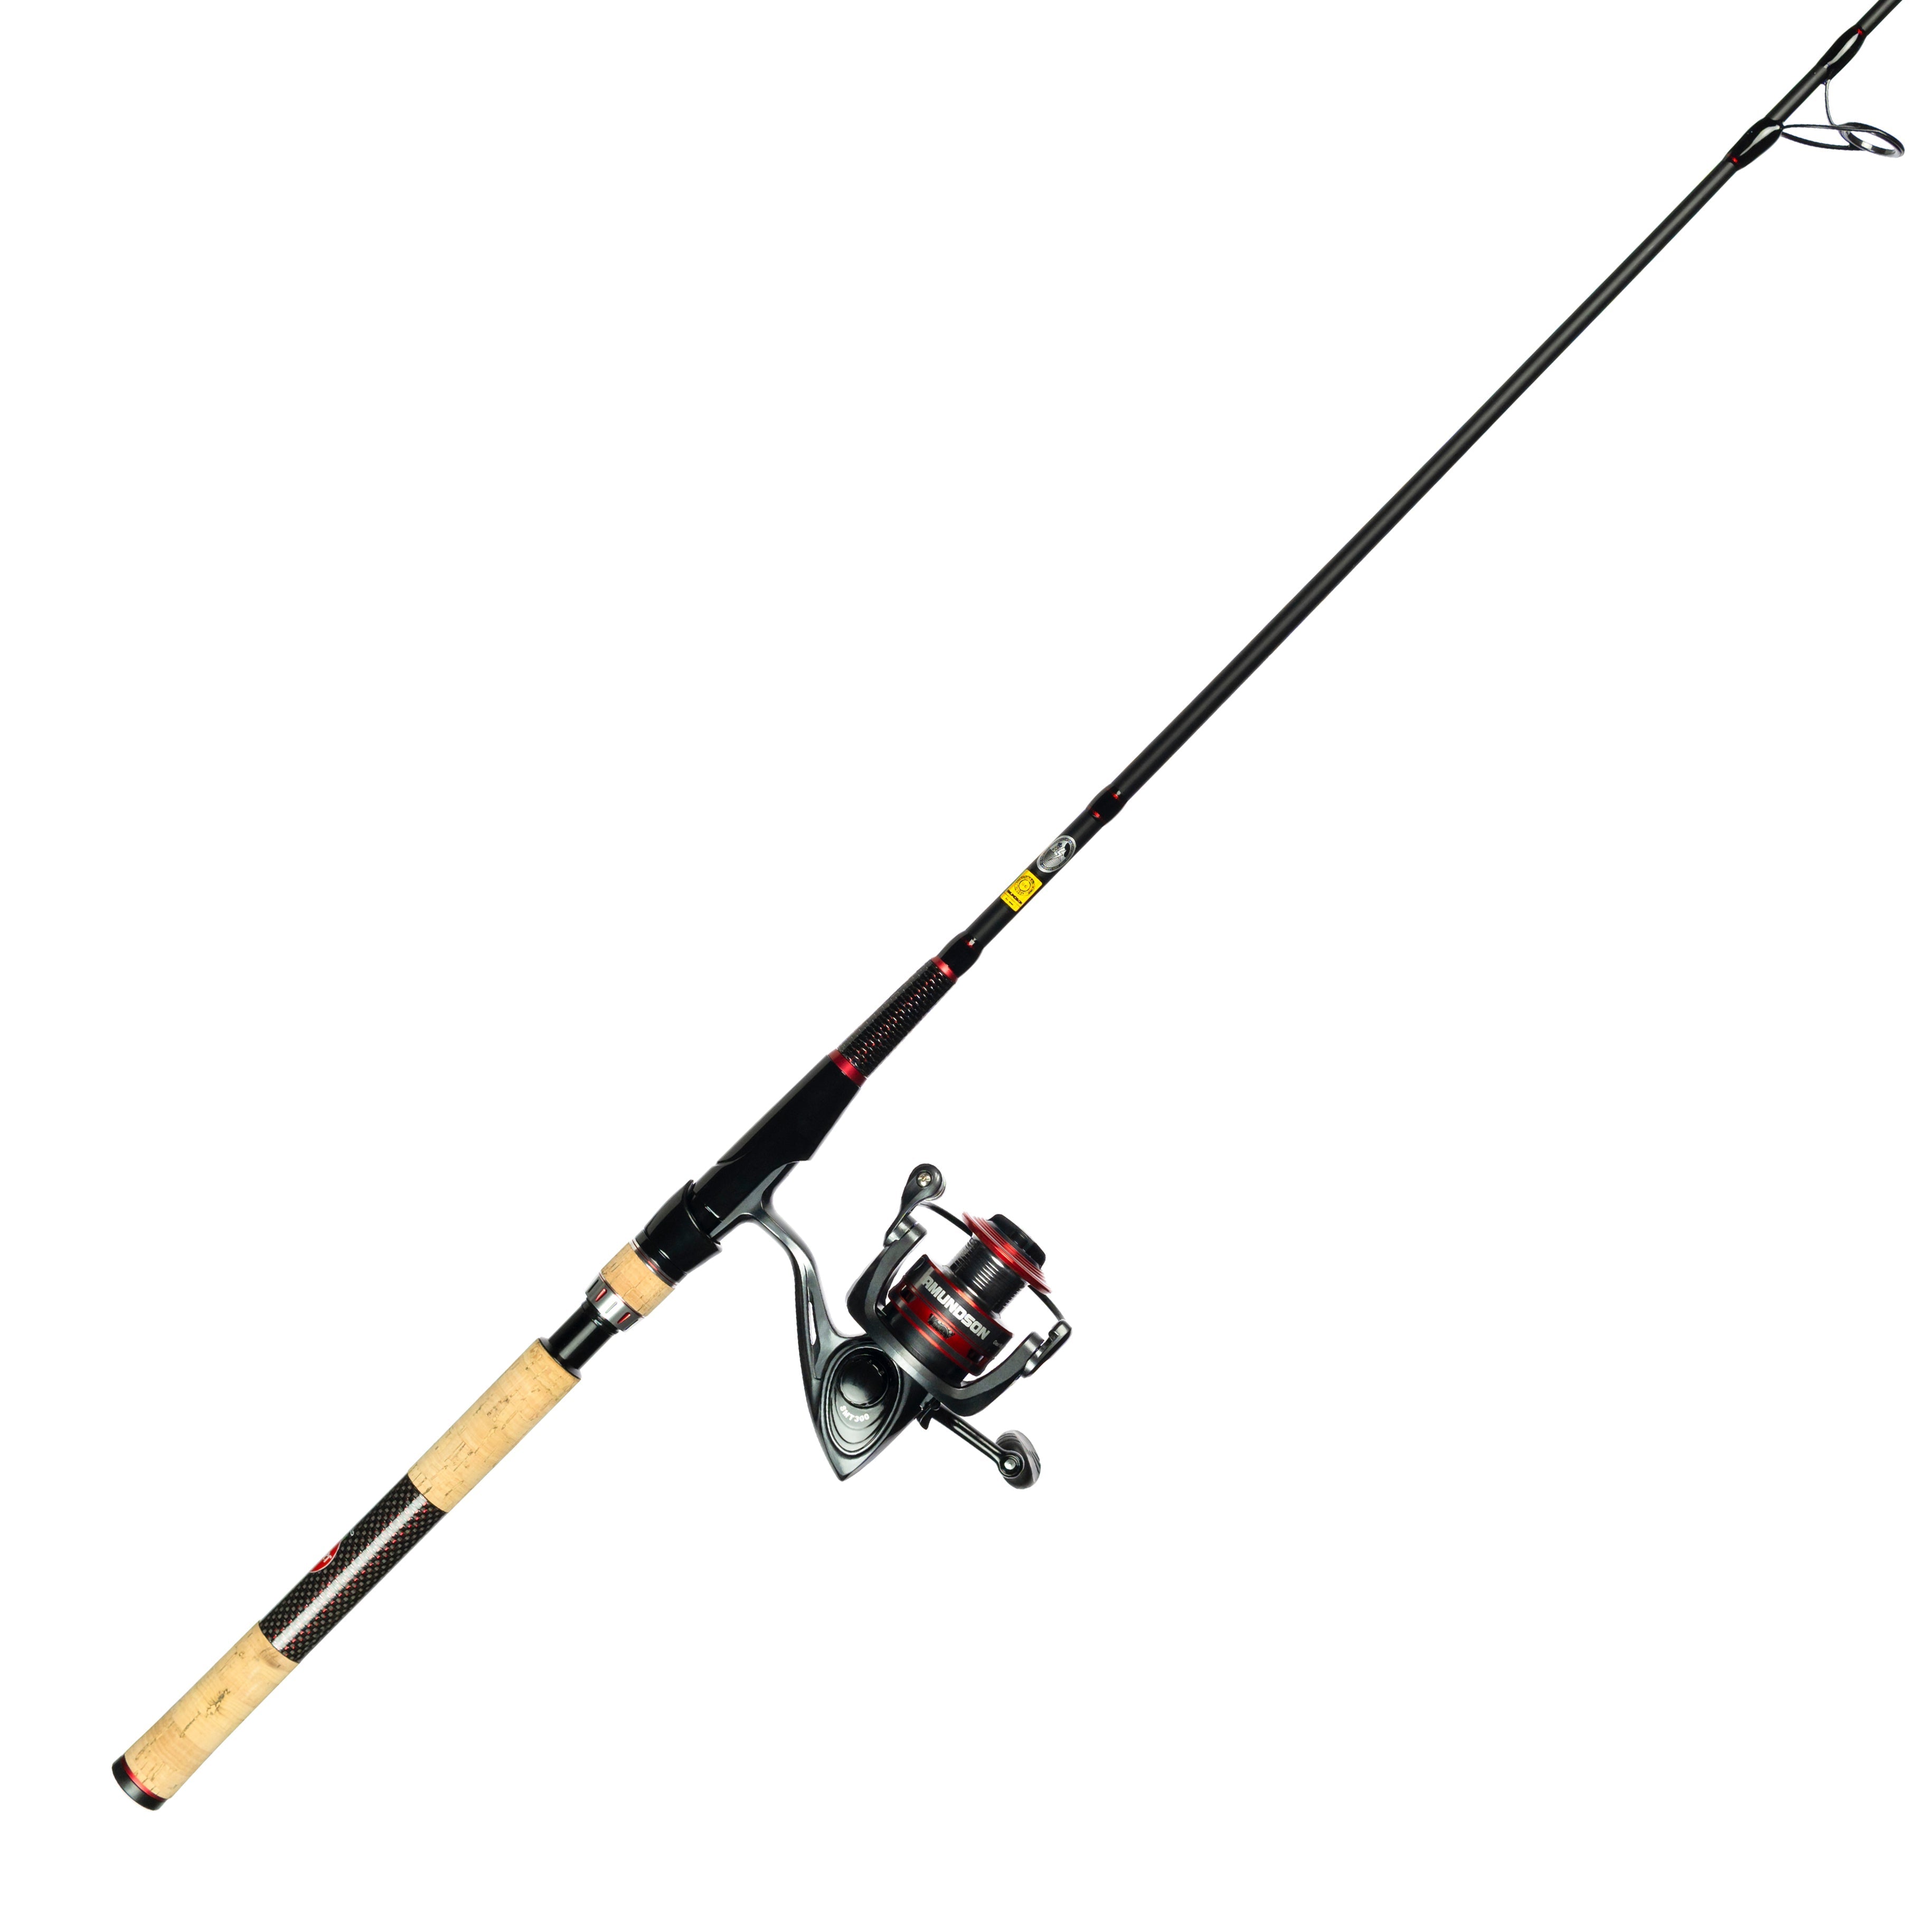  Fishing Rod Combos Spinning Fishing Rod and Reel